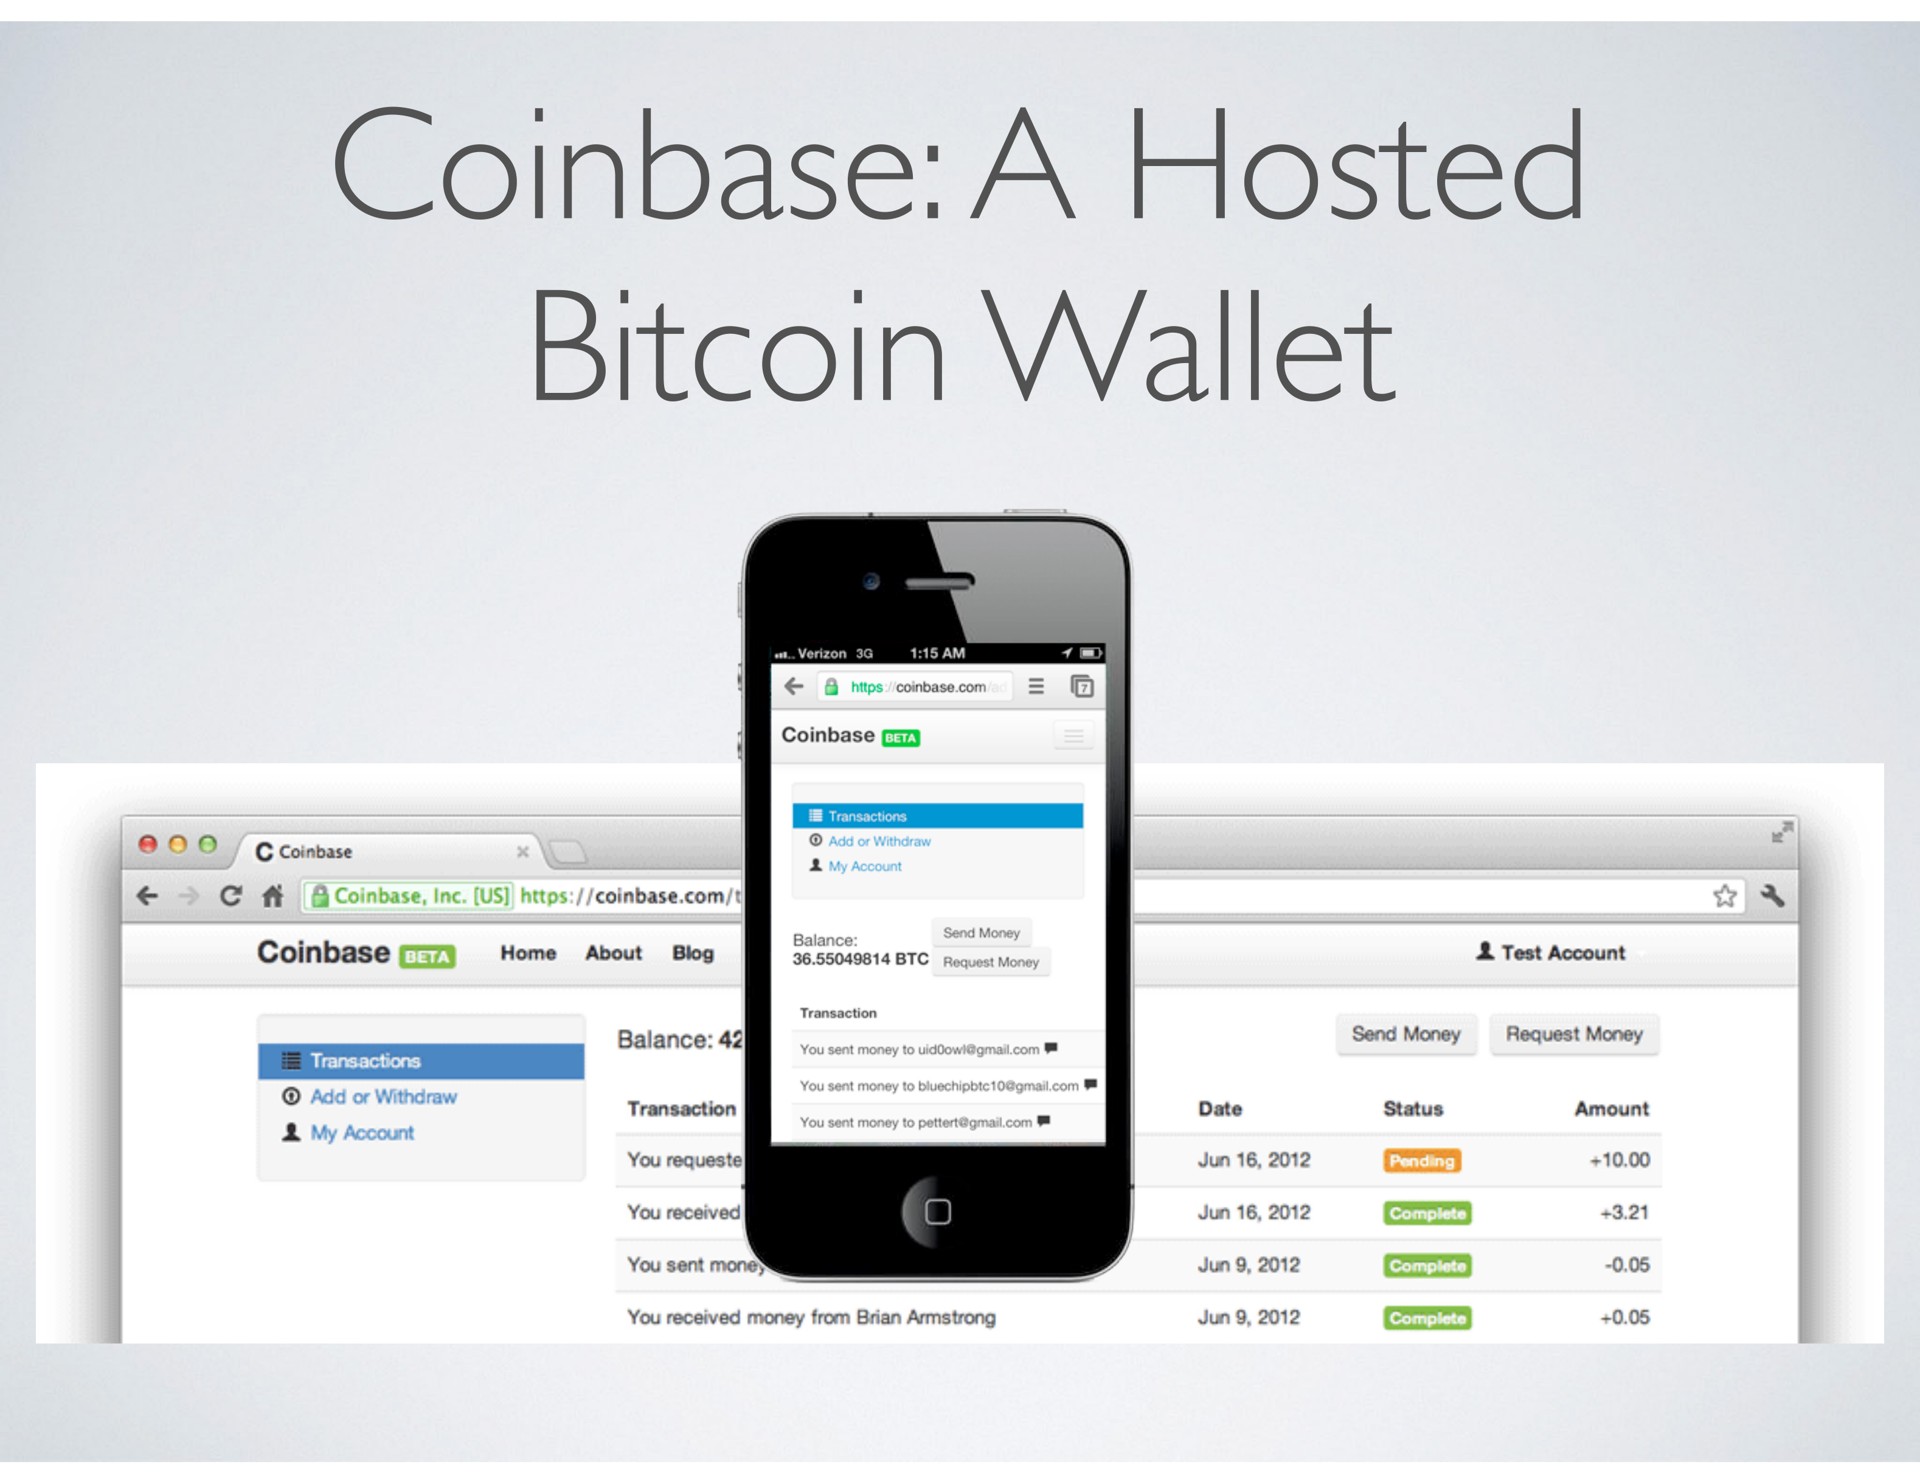 a hosted wallet | Coinbase